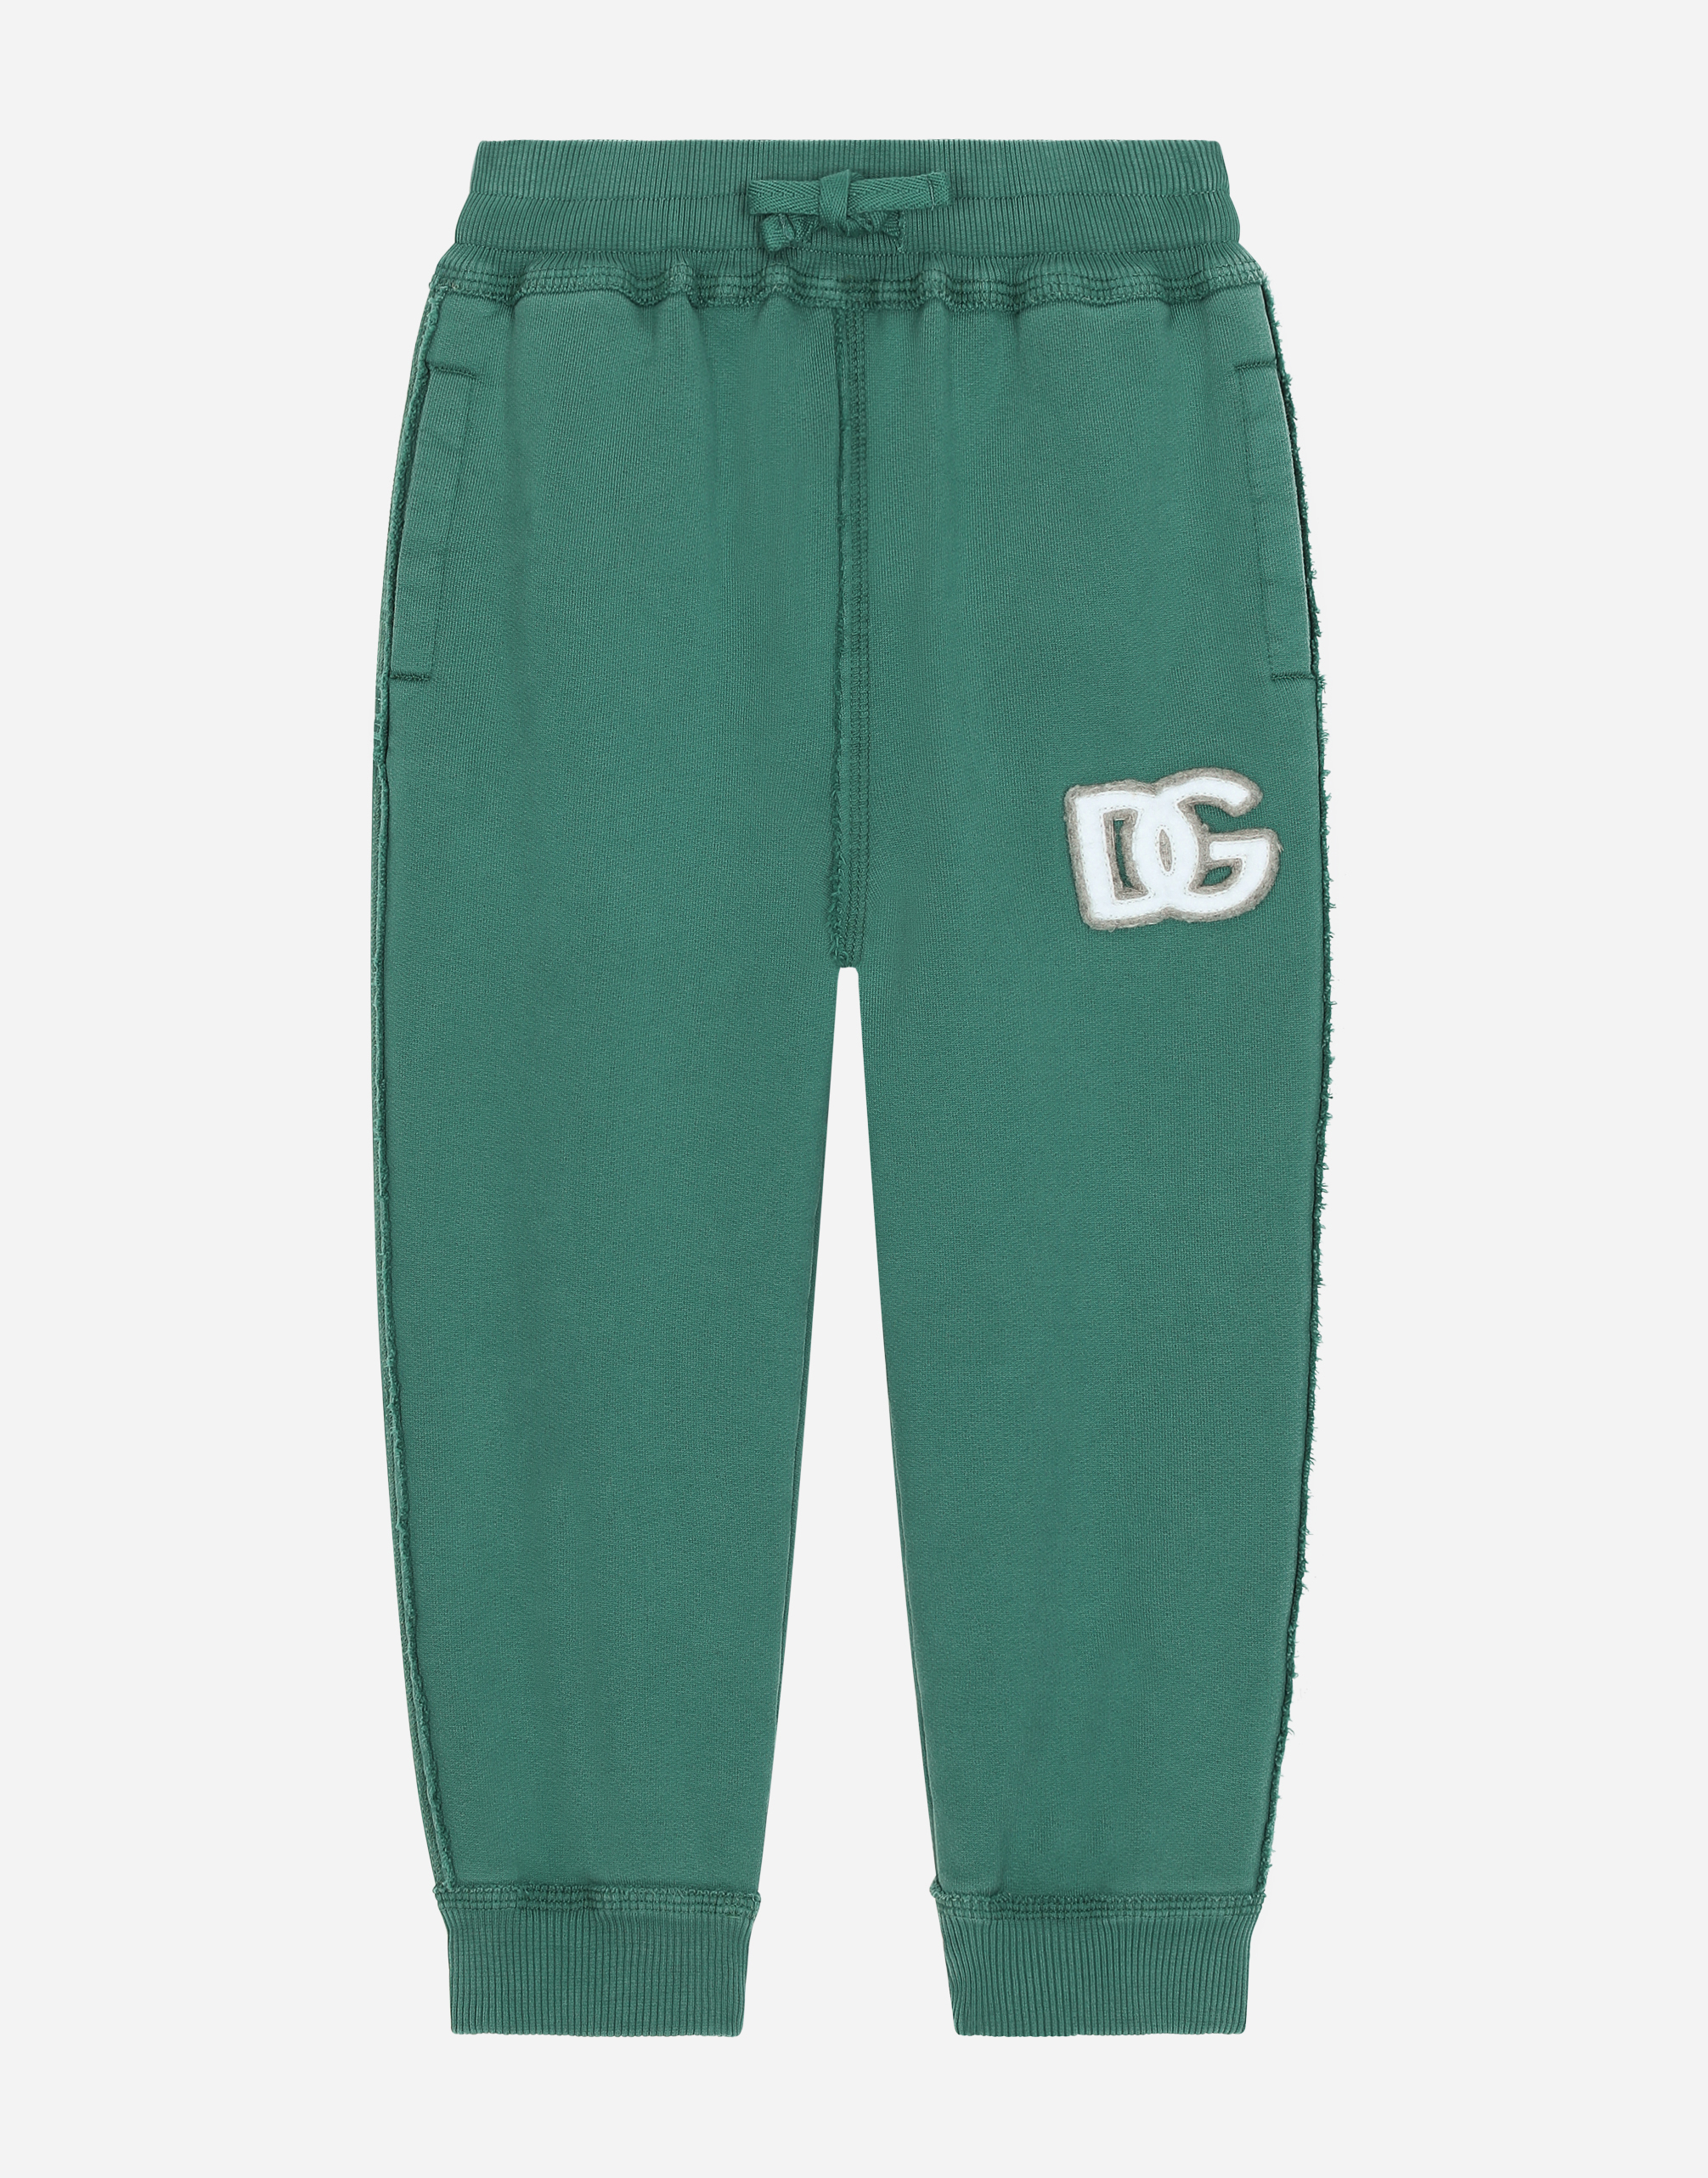 Jersey jogging pants with DG logo patch in Green